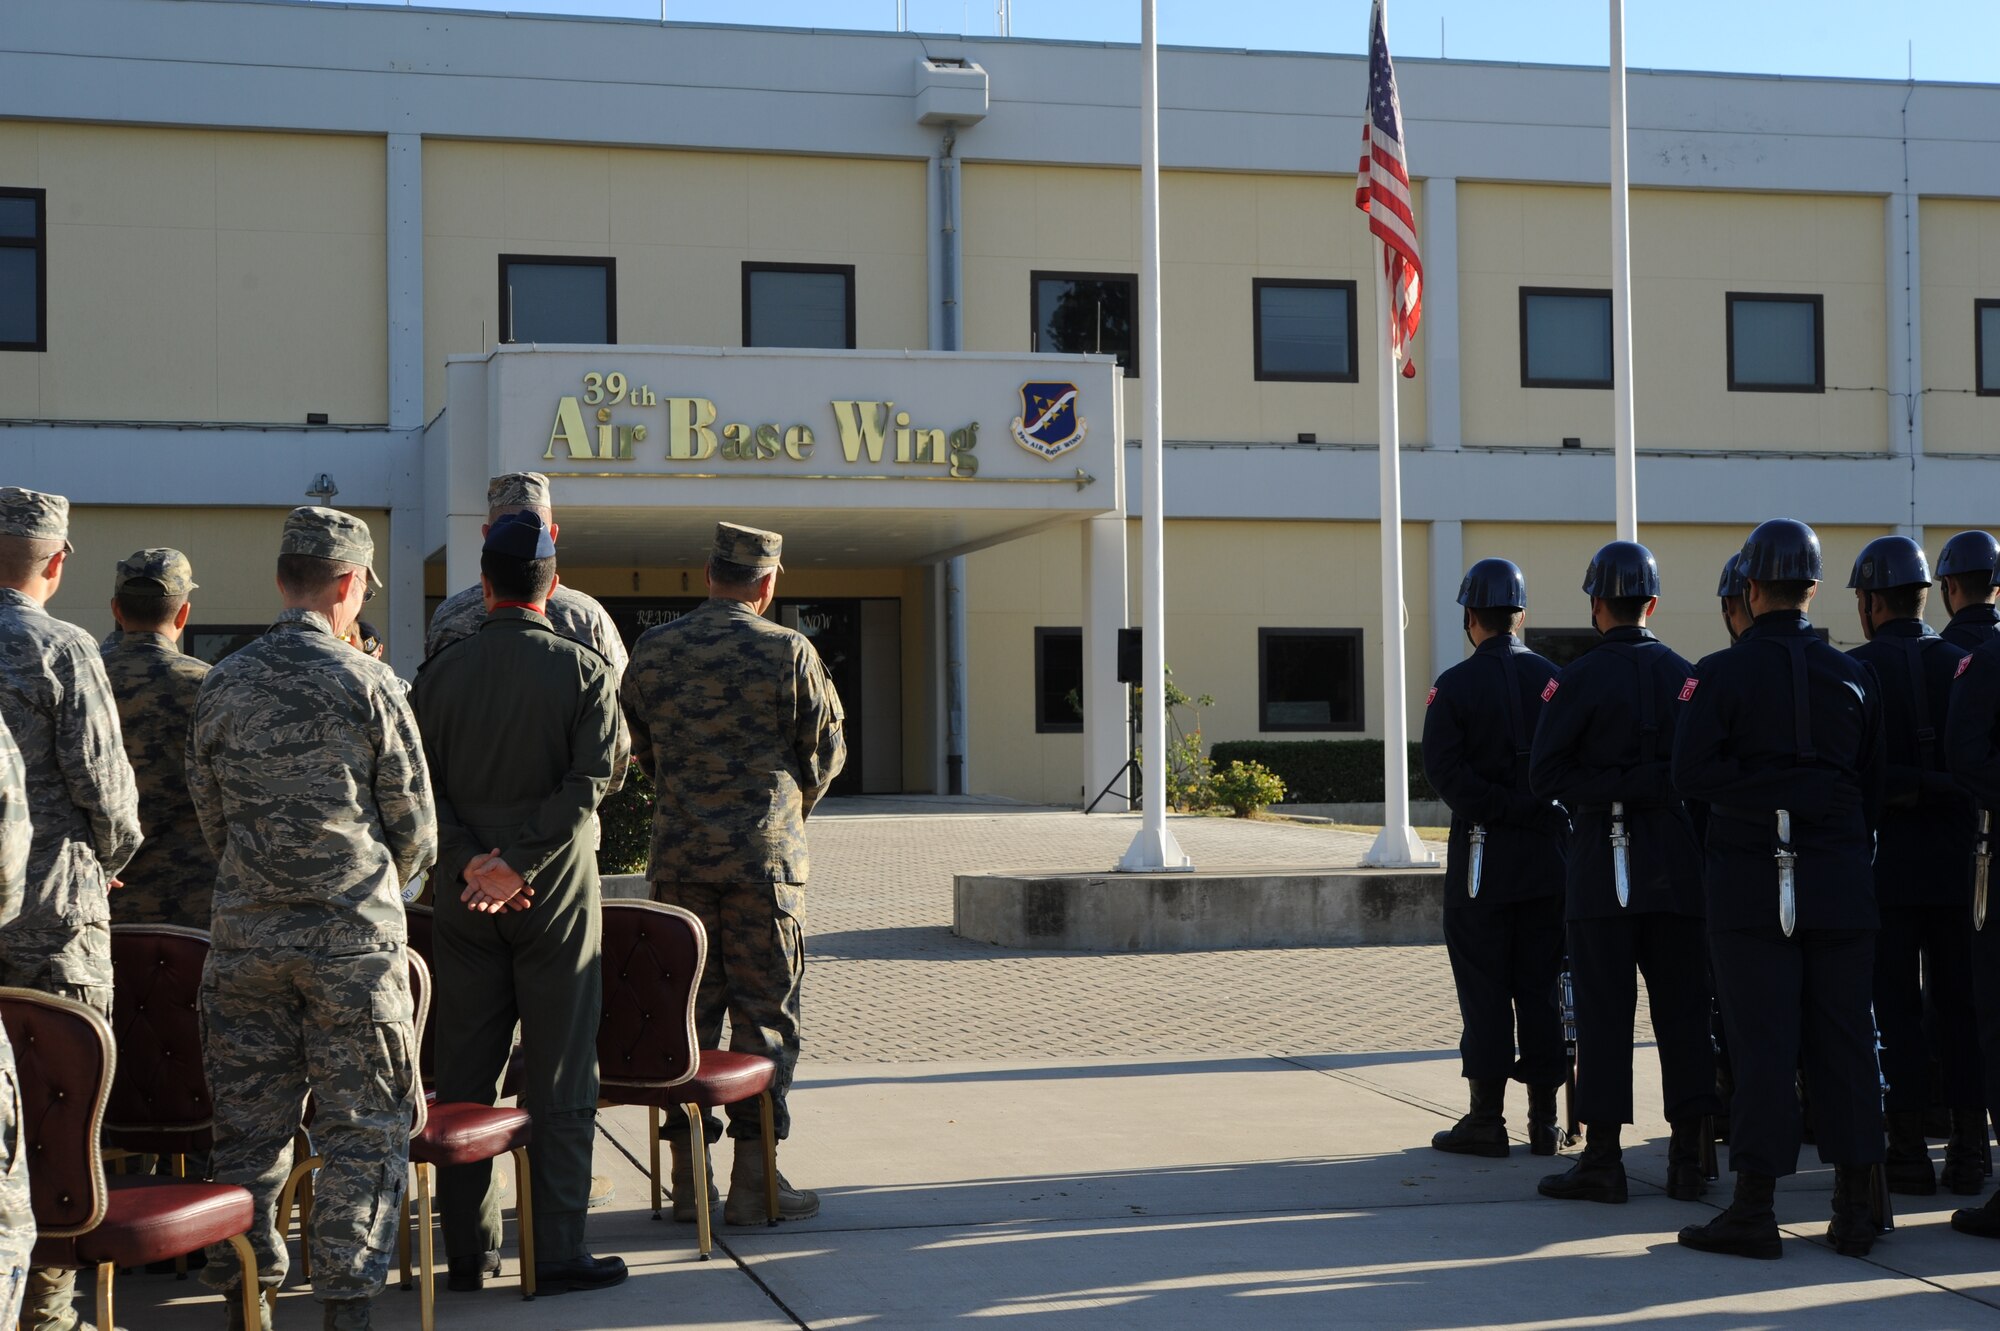 U.S. and Turkish Airmen partner together at the 39th Air Base Wing flagpole for a Veterans Day ceremony Nov. 11, 2015, at Incirlik Air Base, Turkey. The ceremony included remarks by Col. John Walker, 39th ABW commander, and the playing of taps to honor the fallen. (U.S. Air Force photo by Airman 1st Class Daniel Lile/Released)